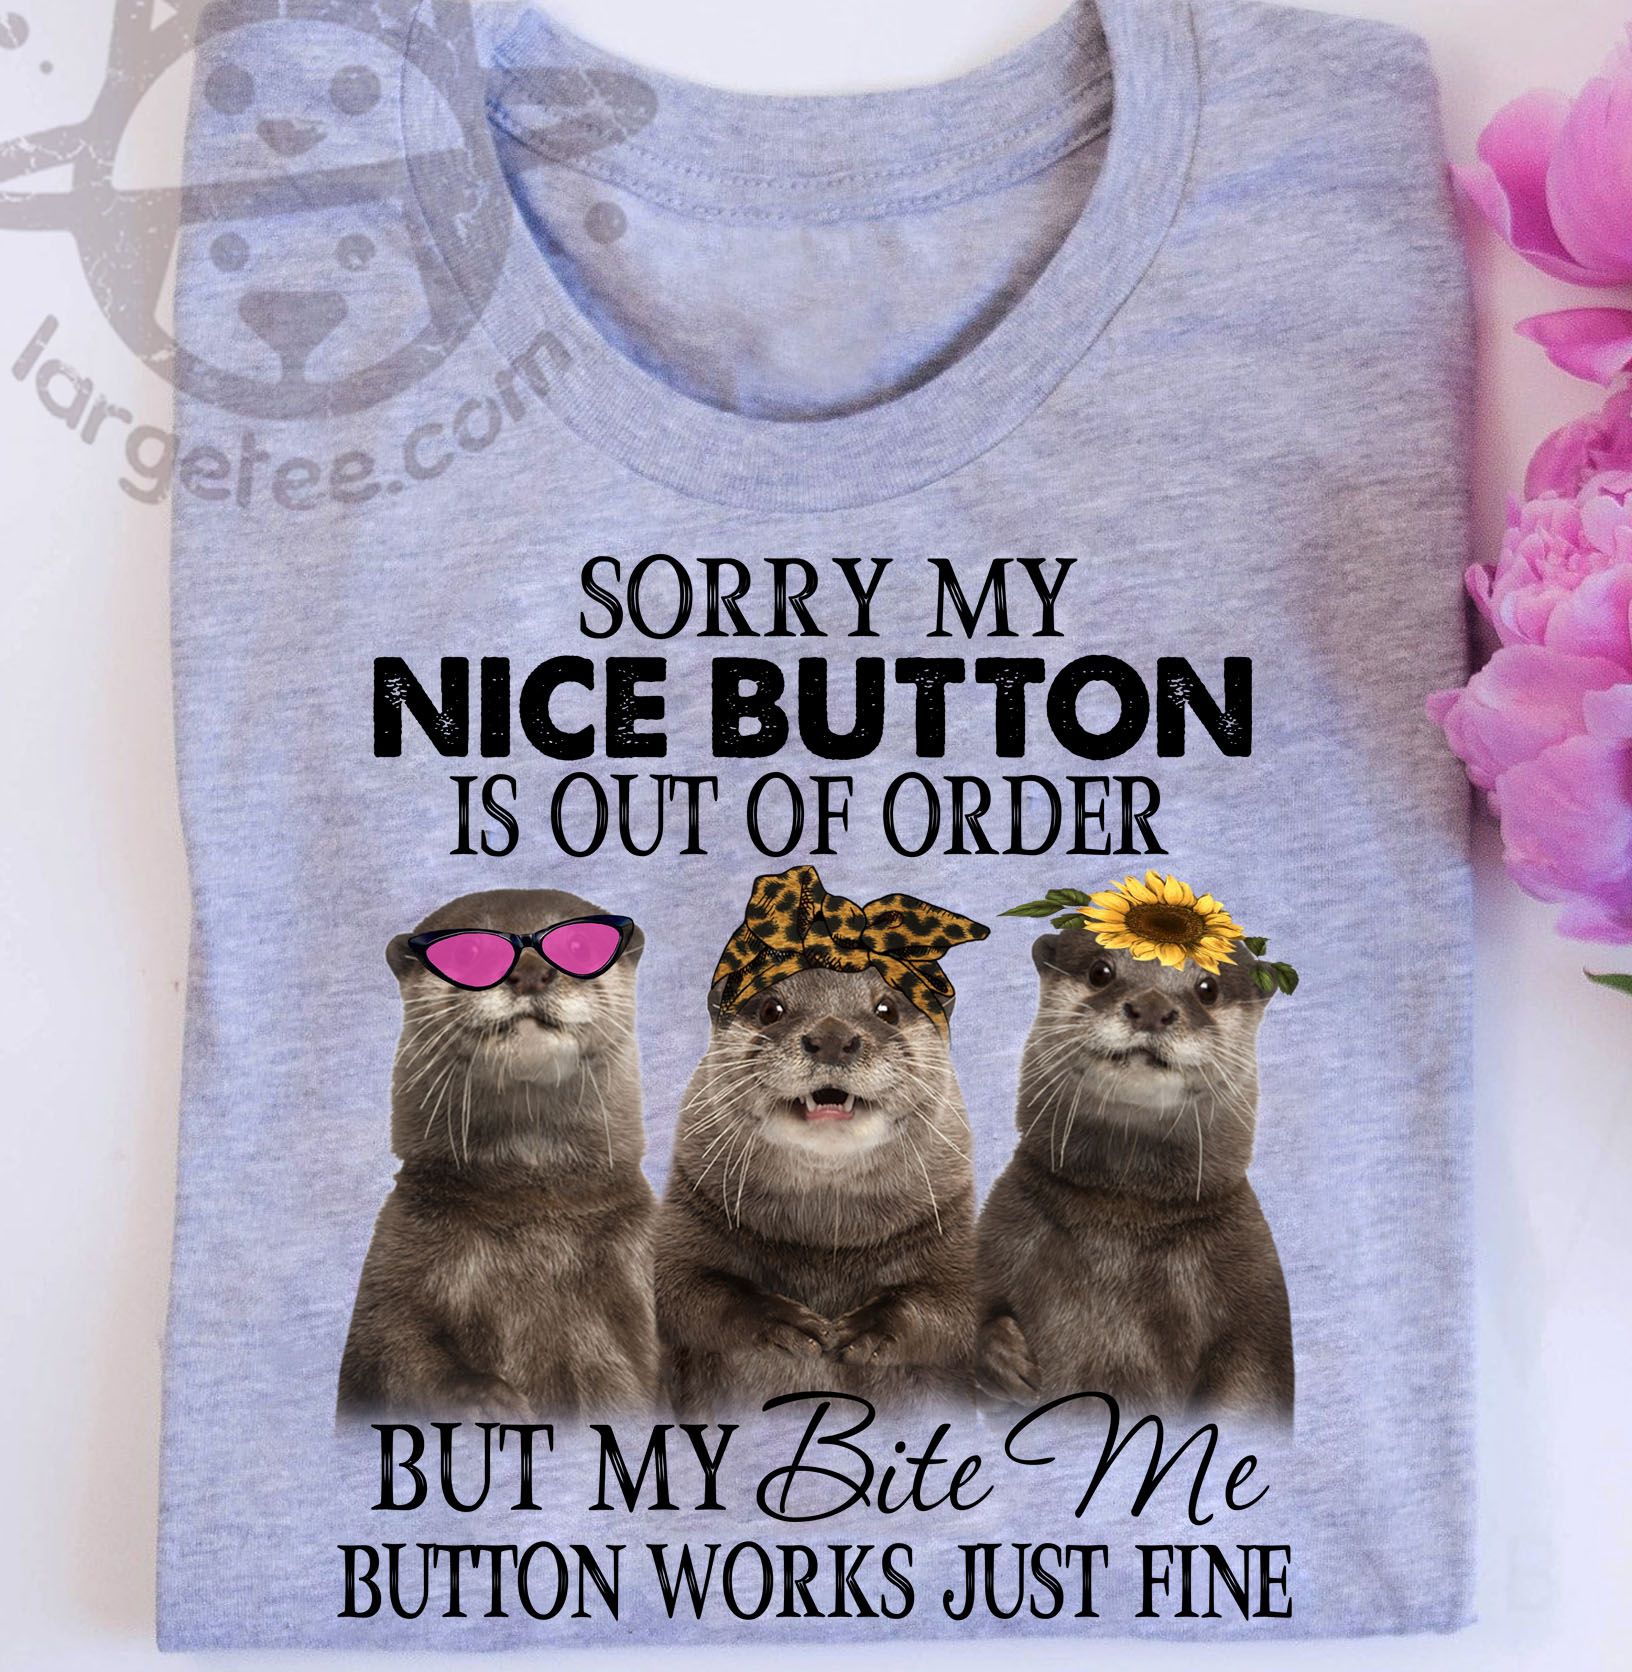 Sorry my nice button is out order - American beaver